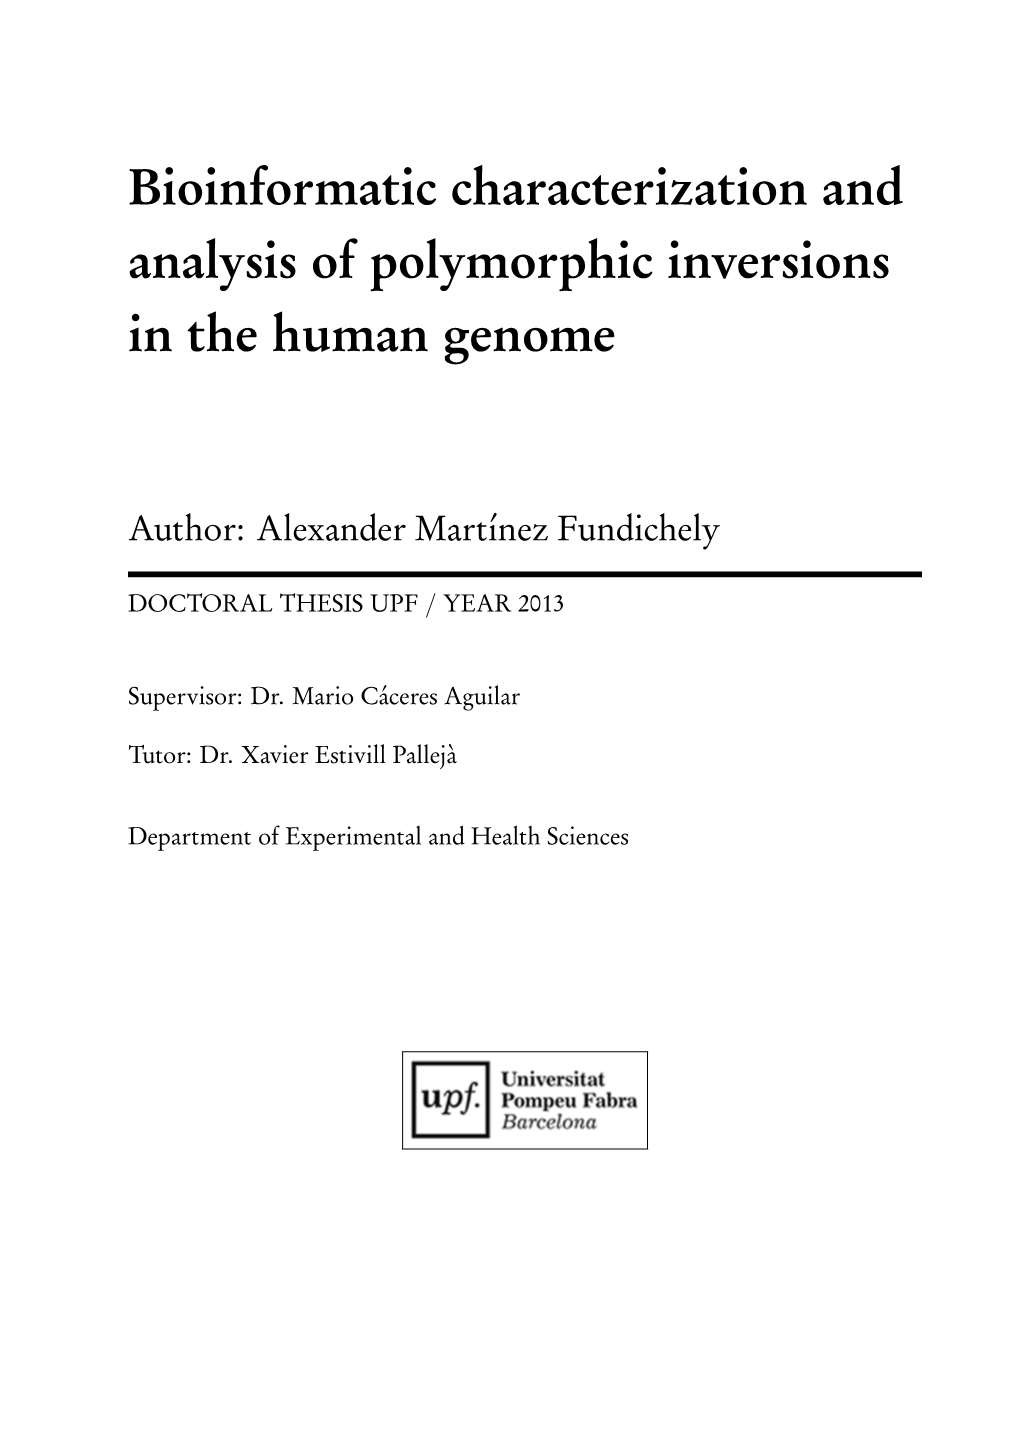 Bioinformatic Characterization and Analysis of Polymorphic Inversions in the Human Genome